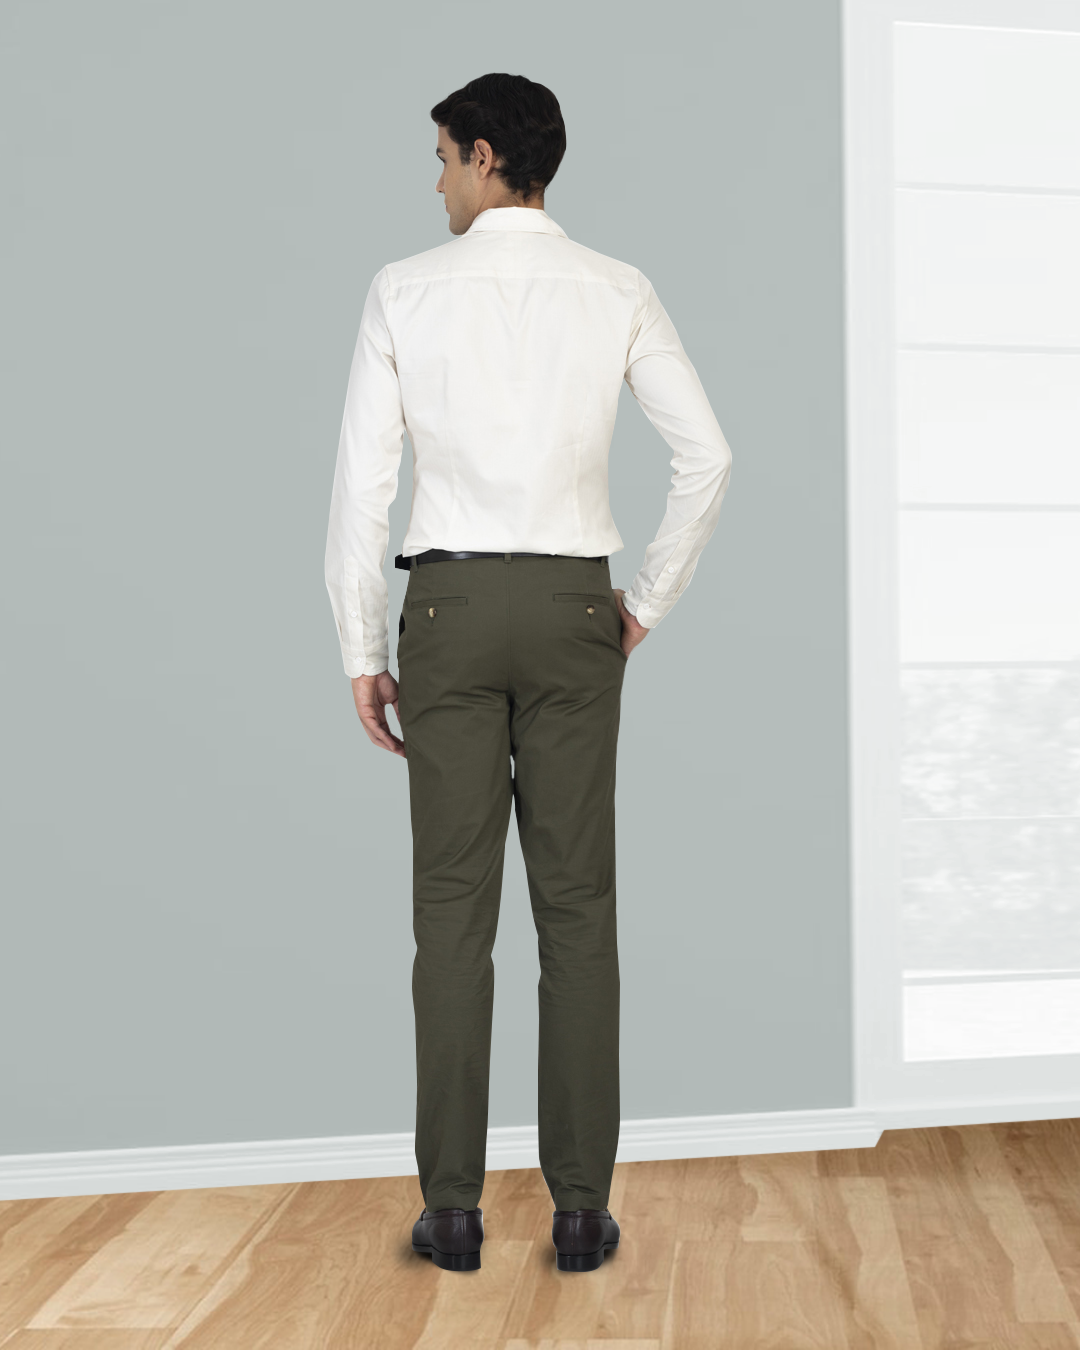 Back view of model wearing custom Genoa Chino pants for men by Luxire in olive green